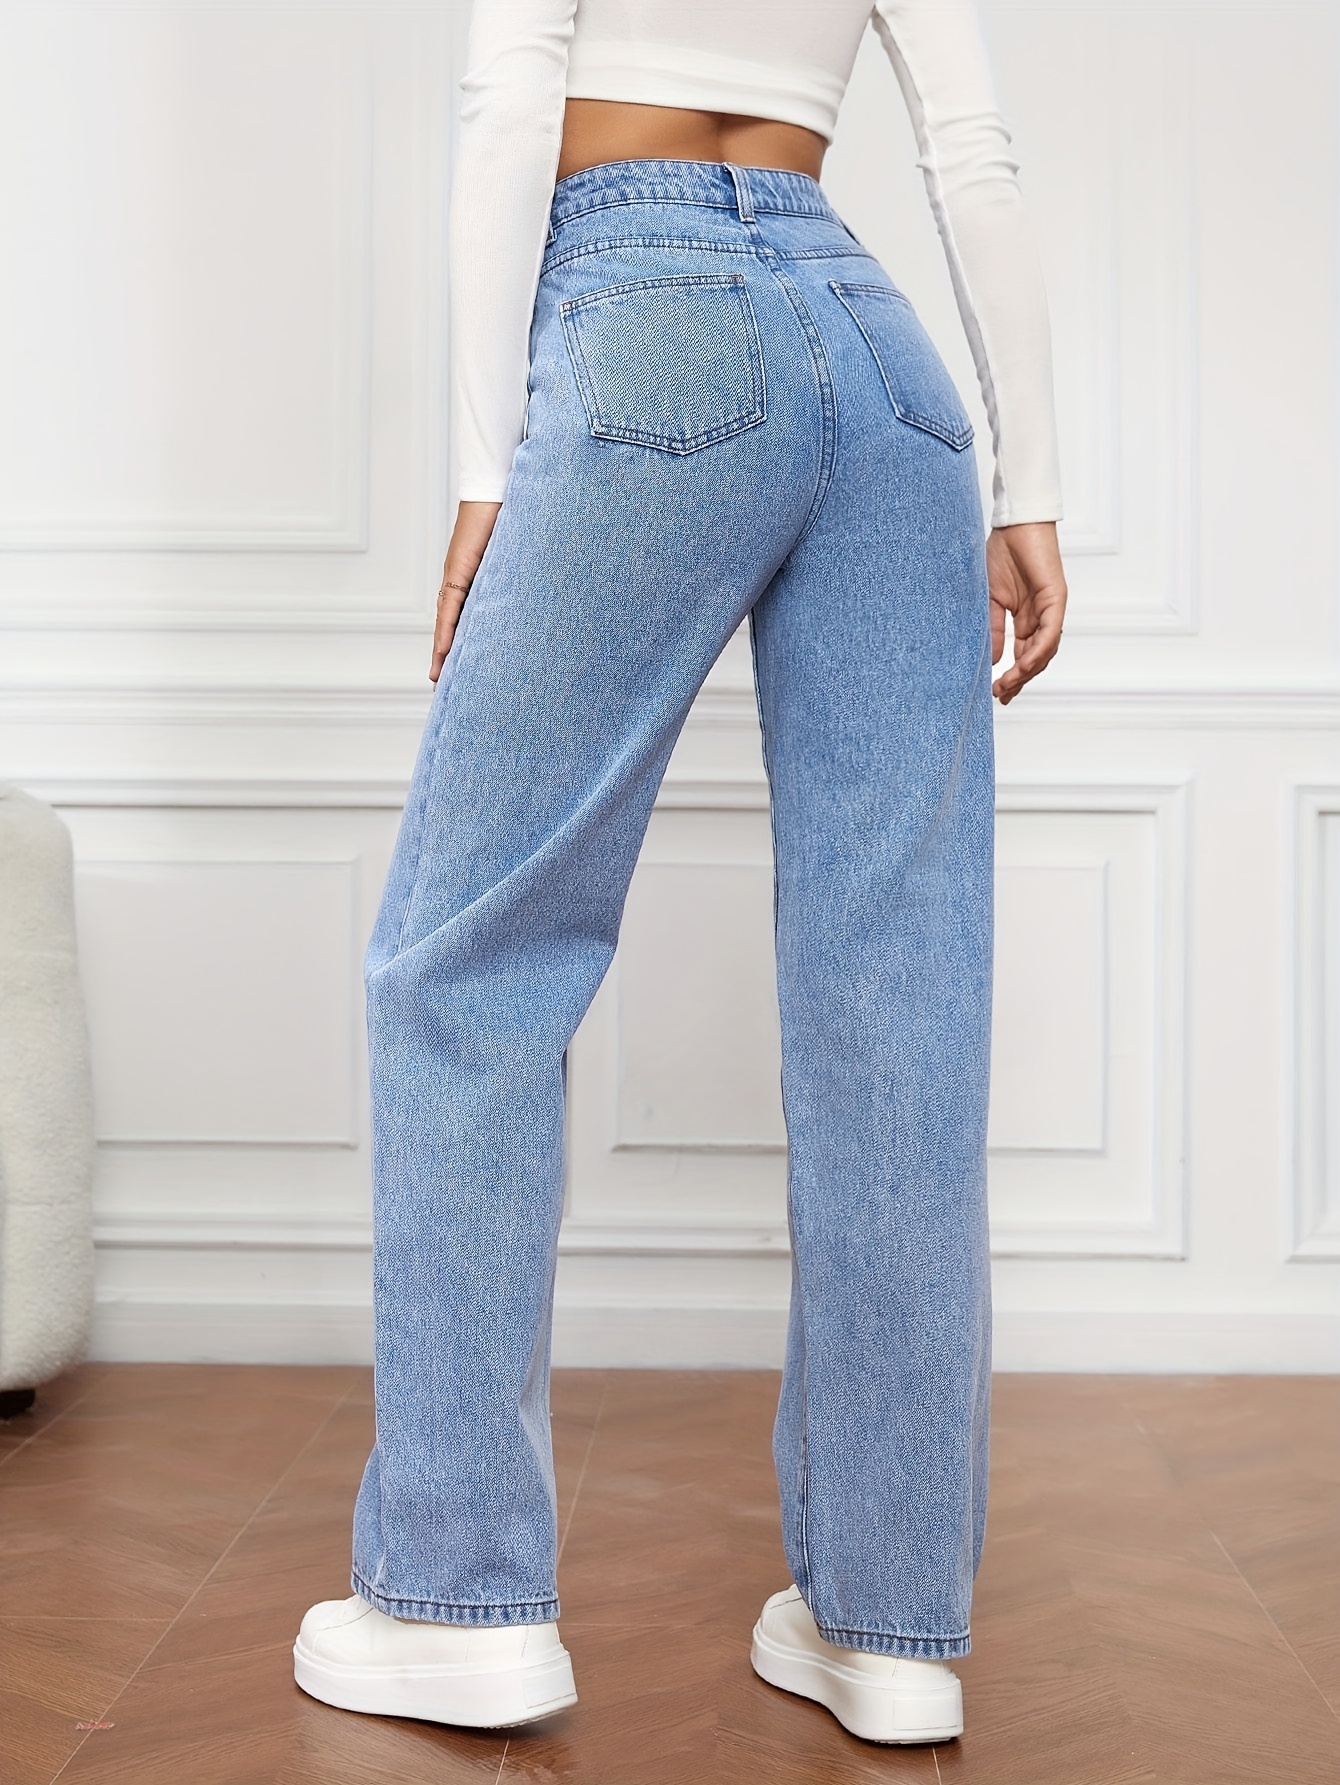 womens high waist washed jeans versatile straight leg pants casual style denim long trousers for daily wear details 6